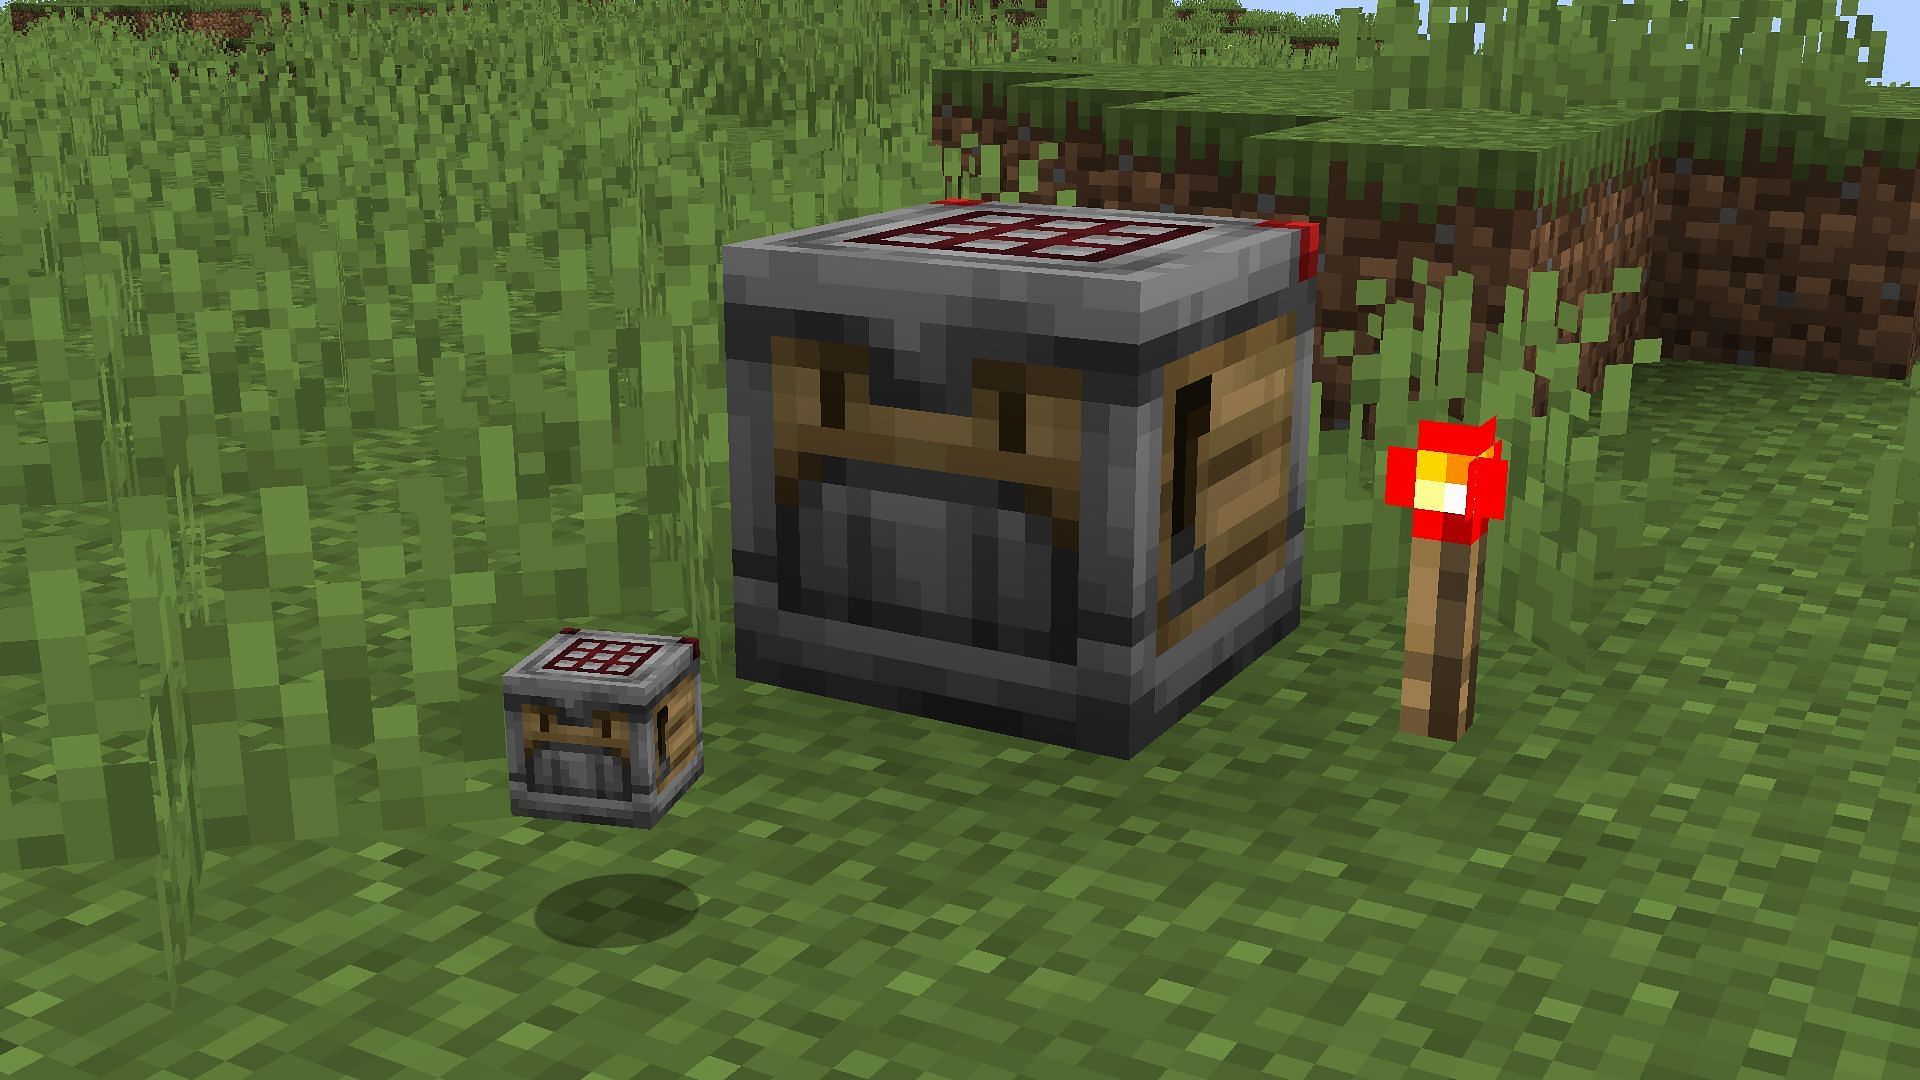 A crafter is a block that can craft items automatically and drop them in the world (Image via Mojang Studios)